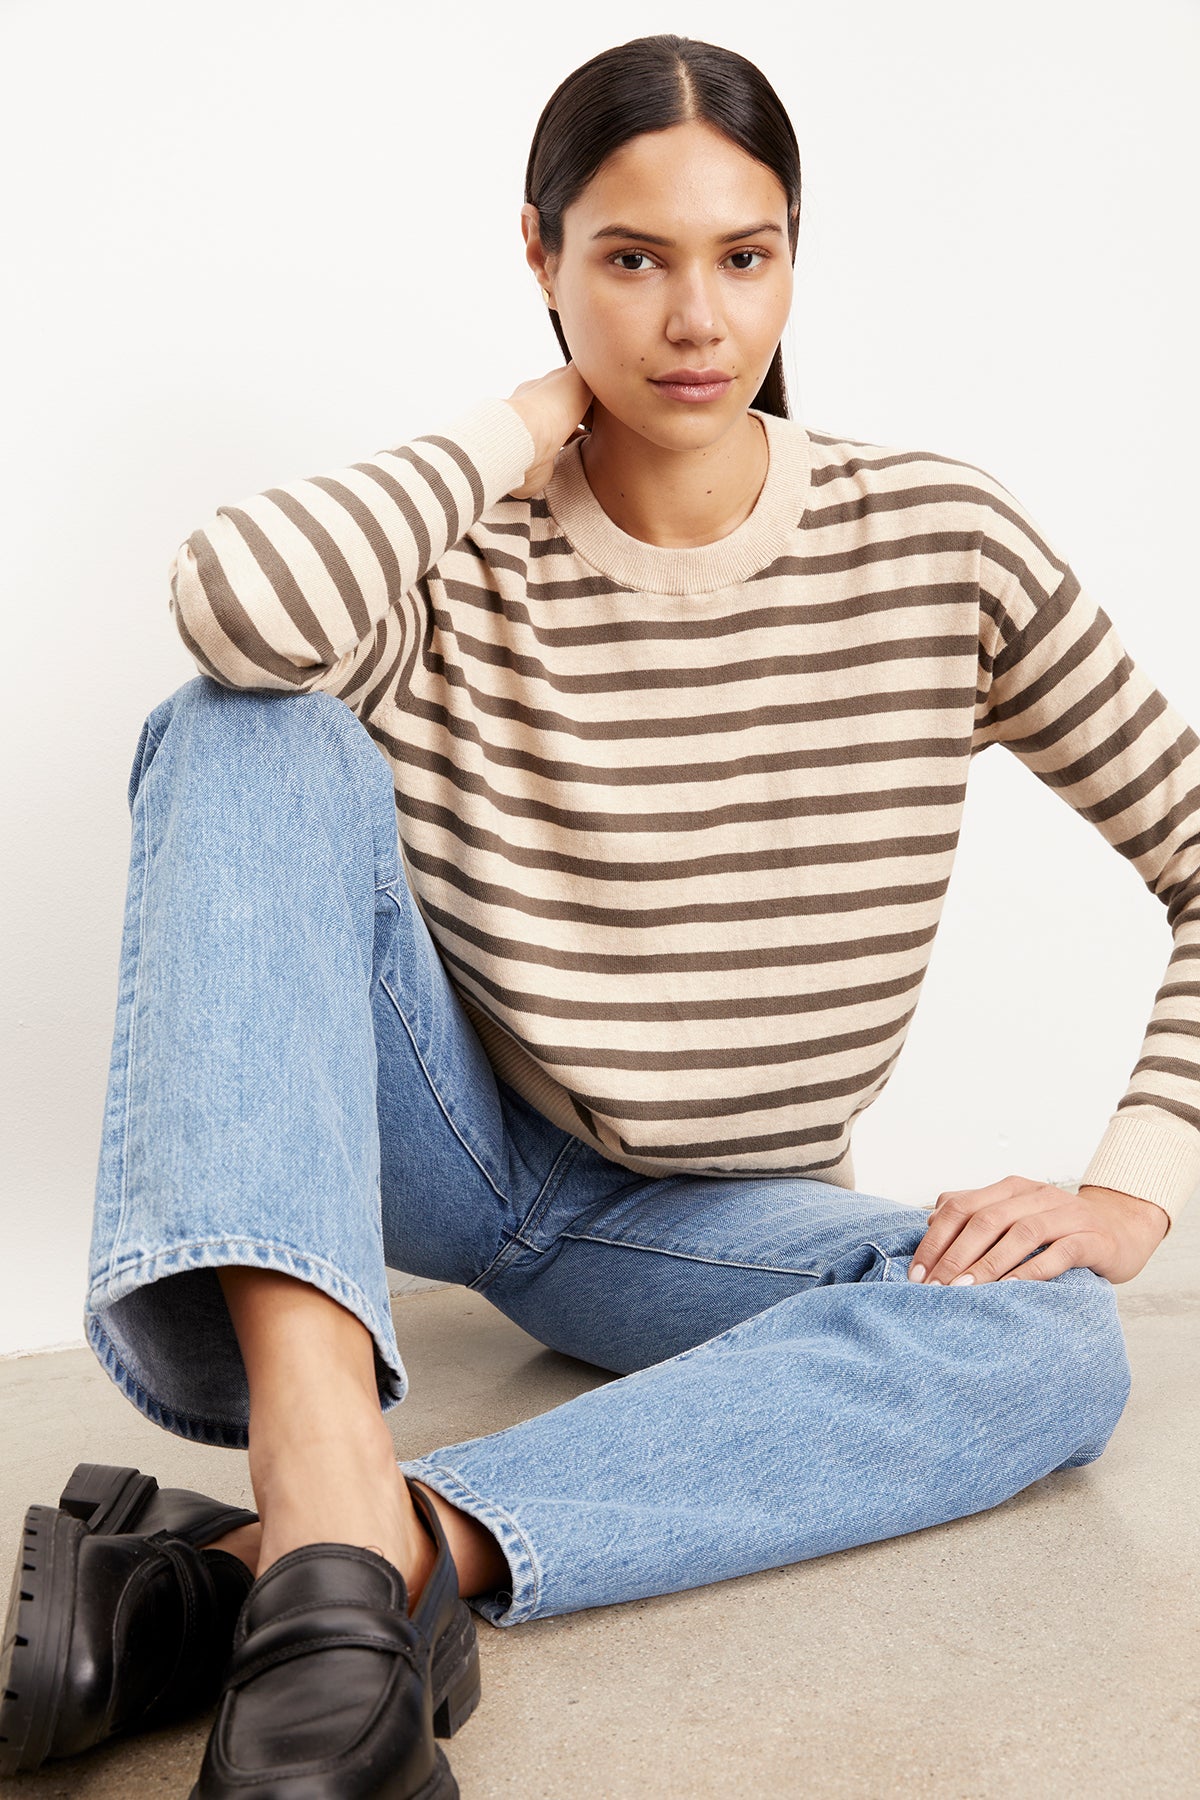   The model is wearing a Velvet by Graham & Spencer ALISTER STRIPED CREW NECK SWEATER and jeans. 